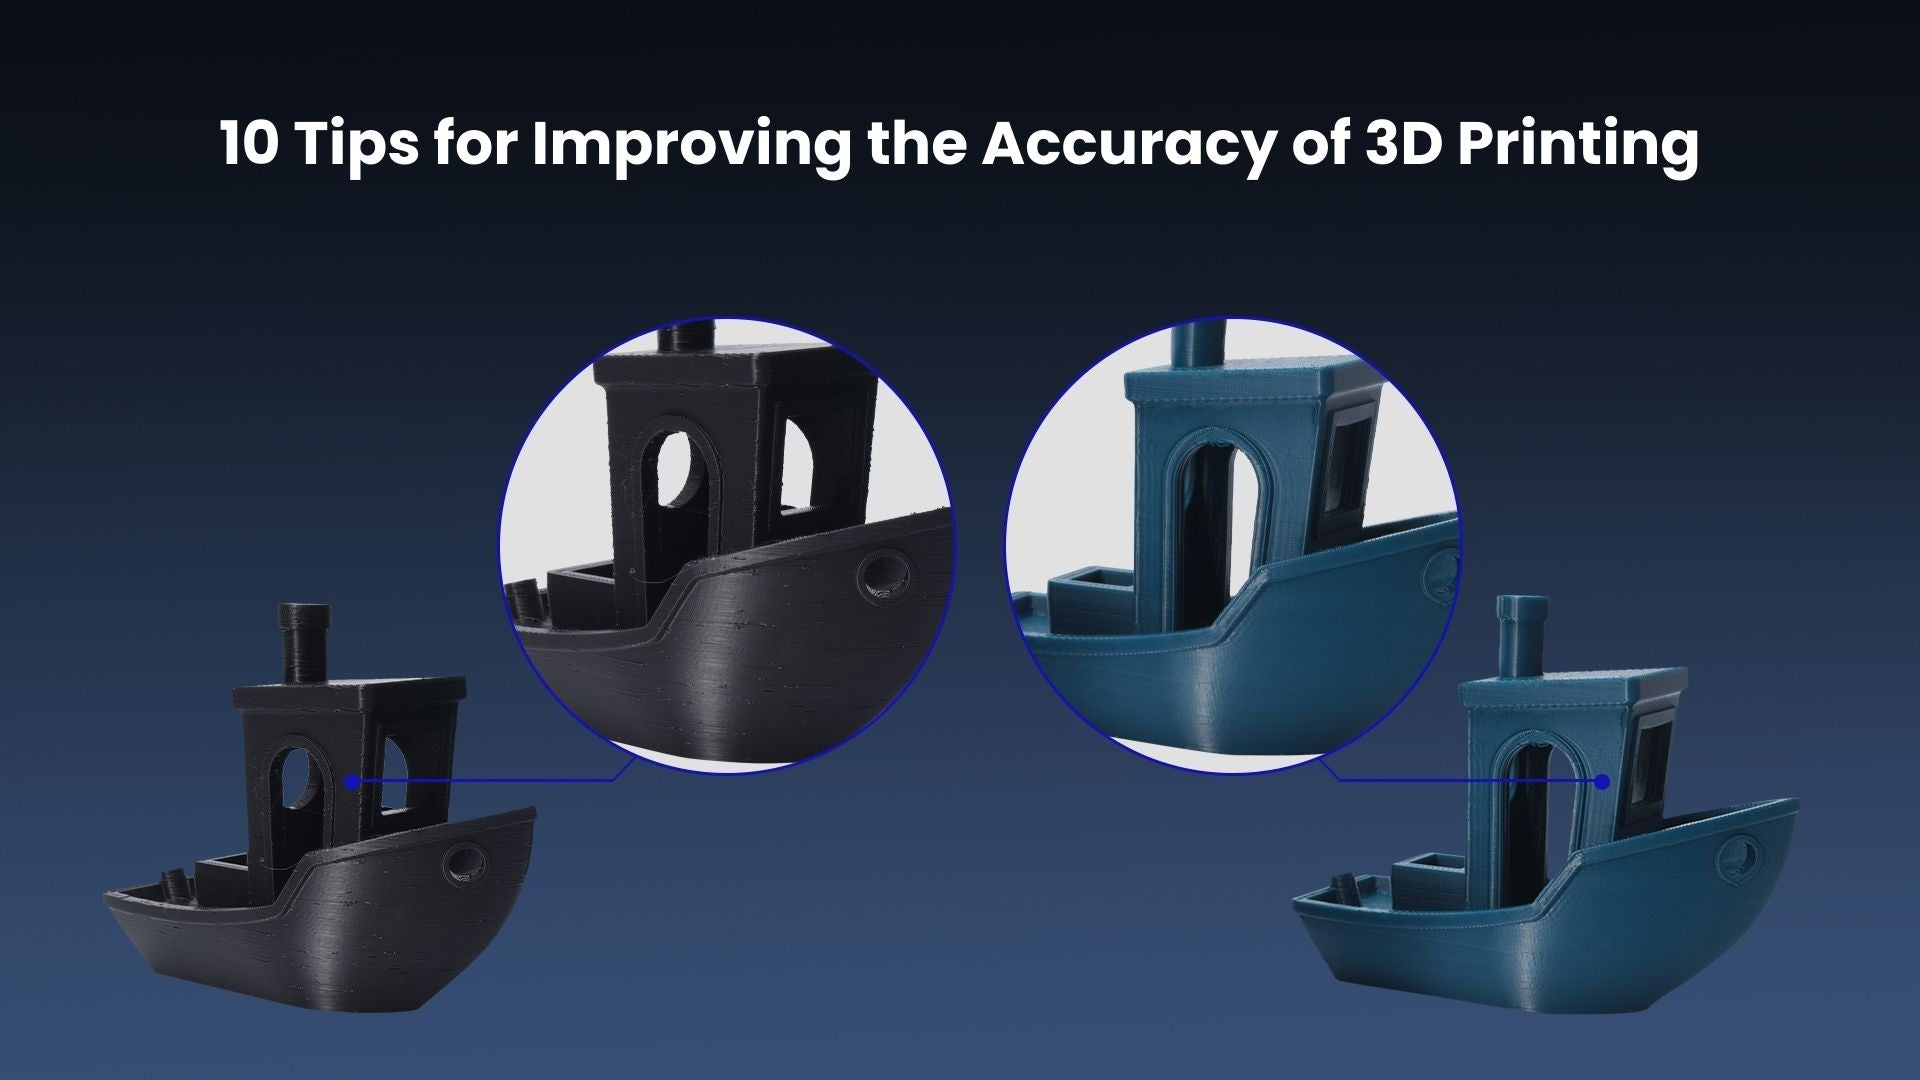 10 Tips for Improving the Accuracy of 3D Printing